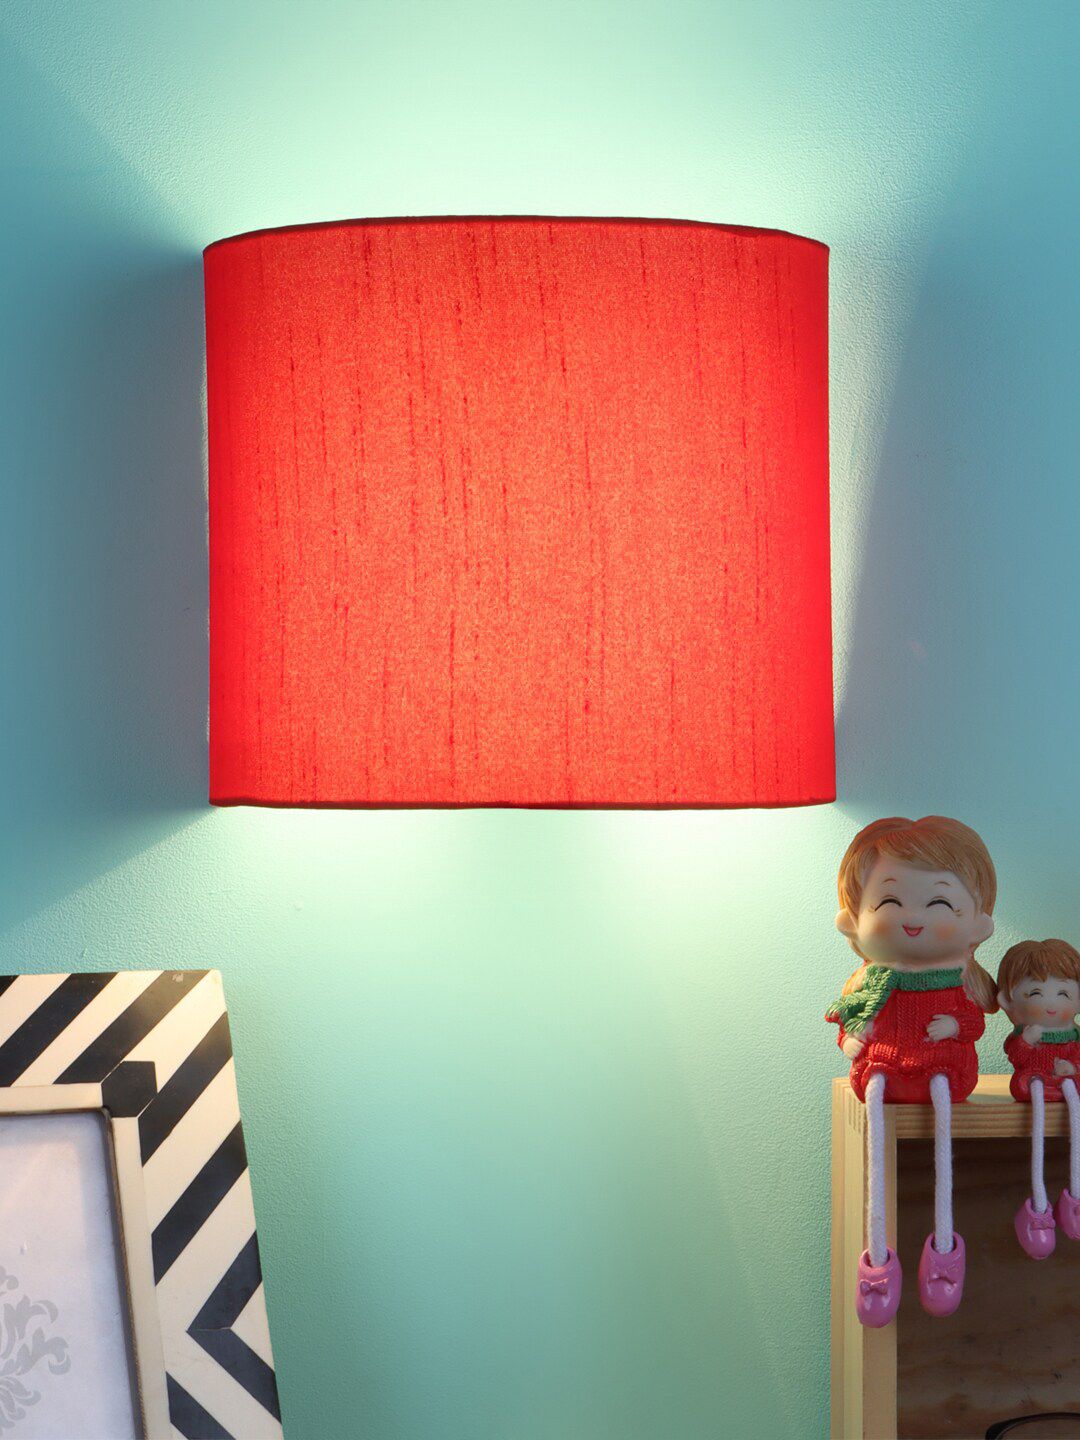 Foziq Red Wall Lamp Price in India